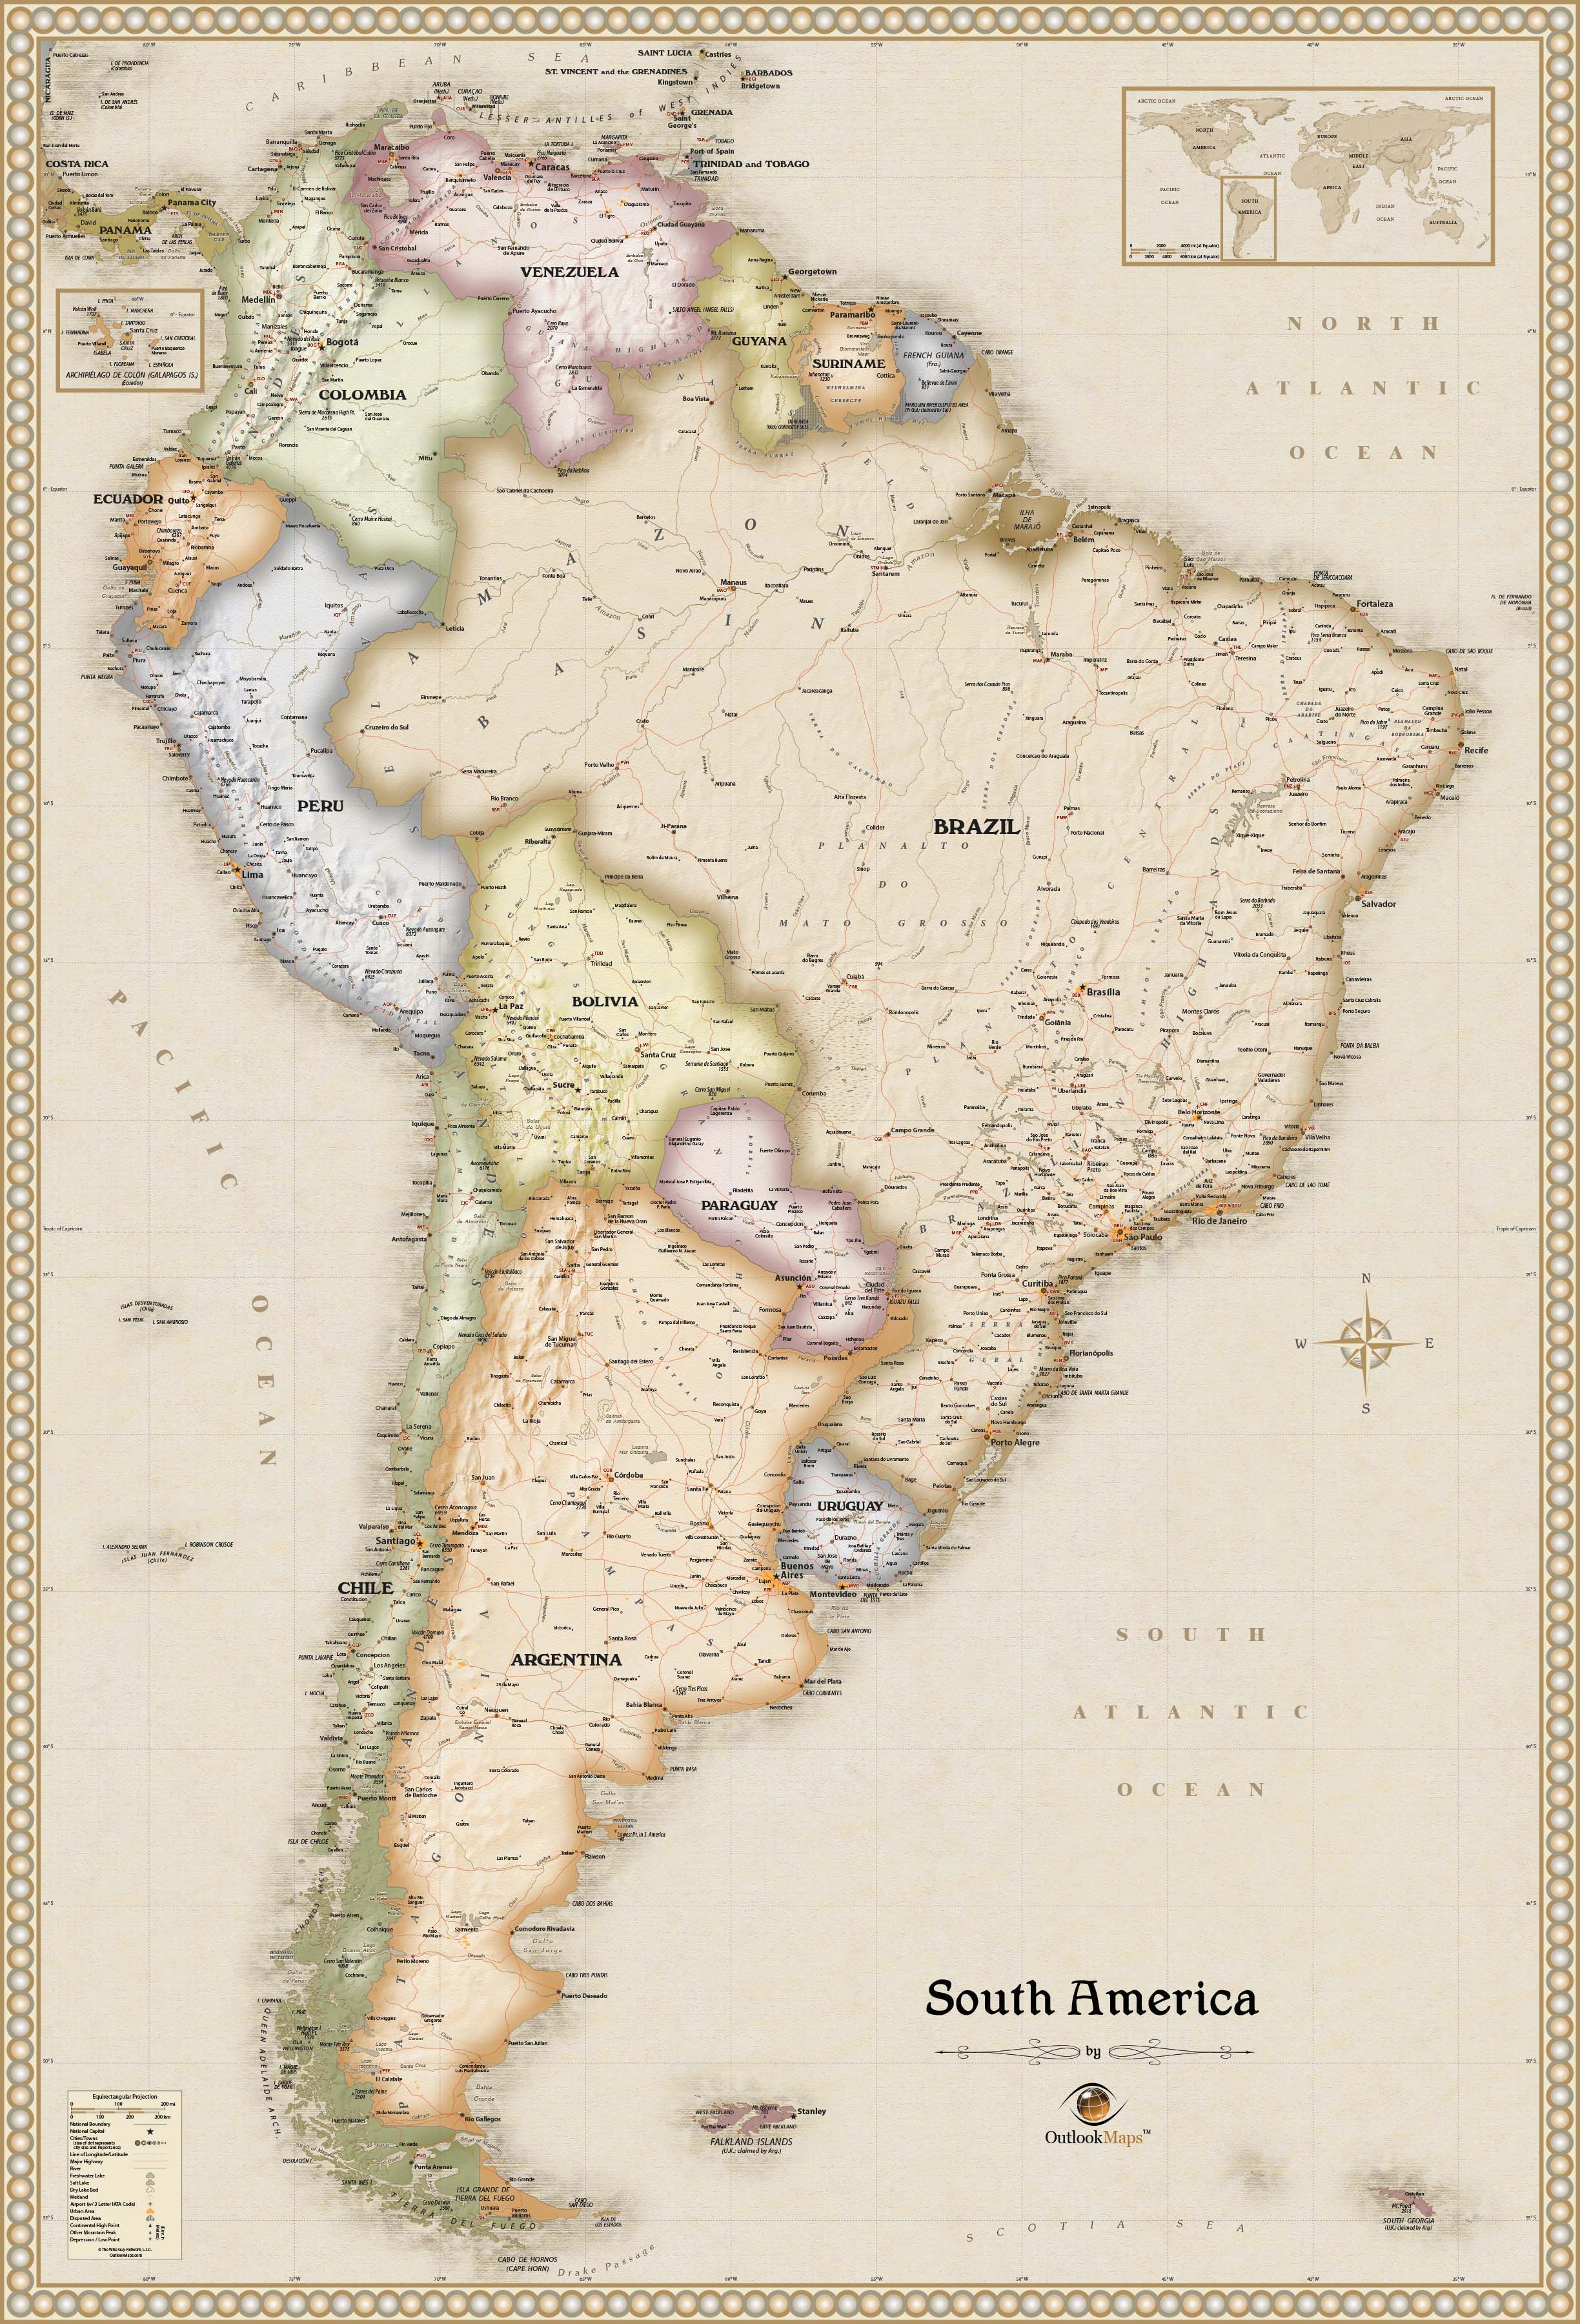 South America Antique Wall Map By Outlook Maps Mapsales